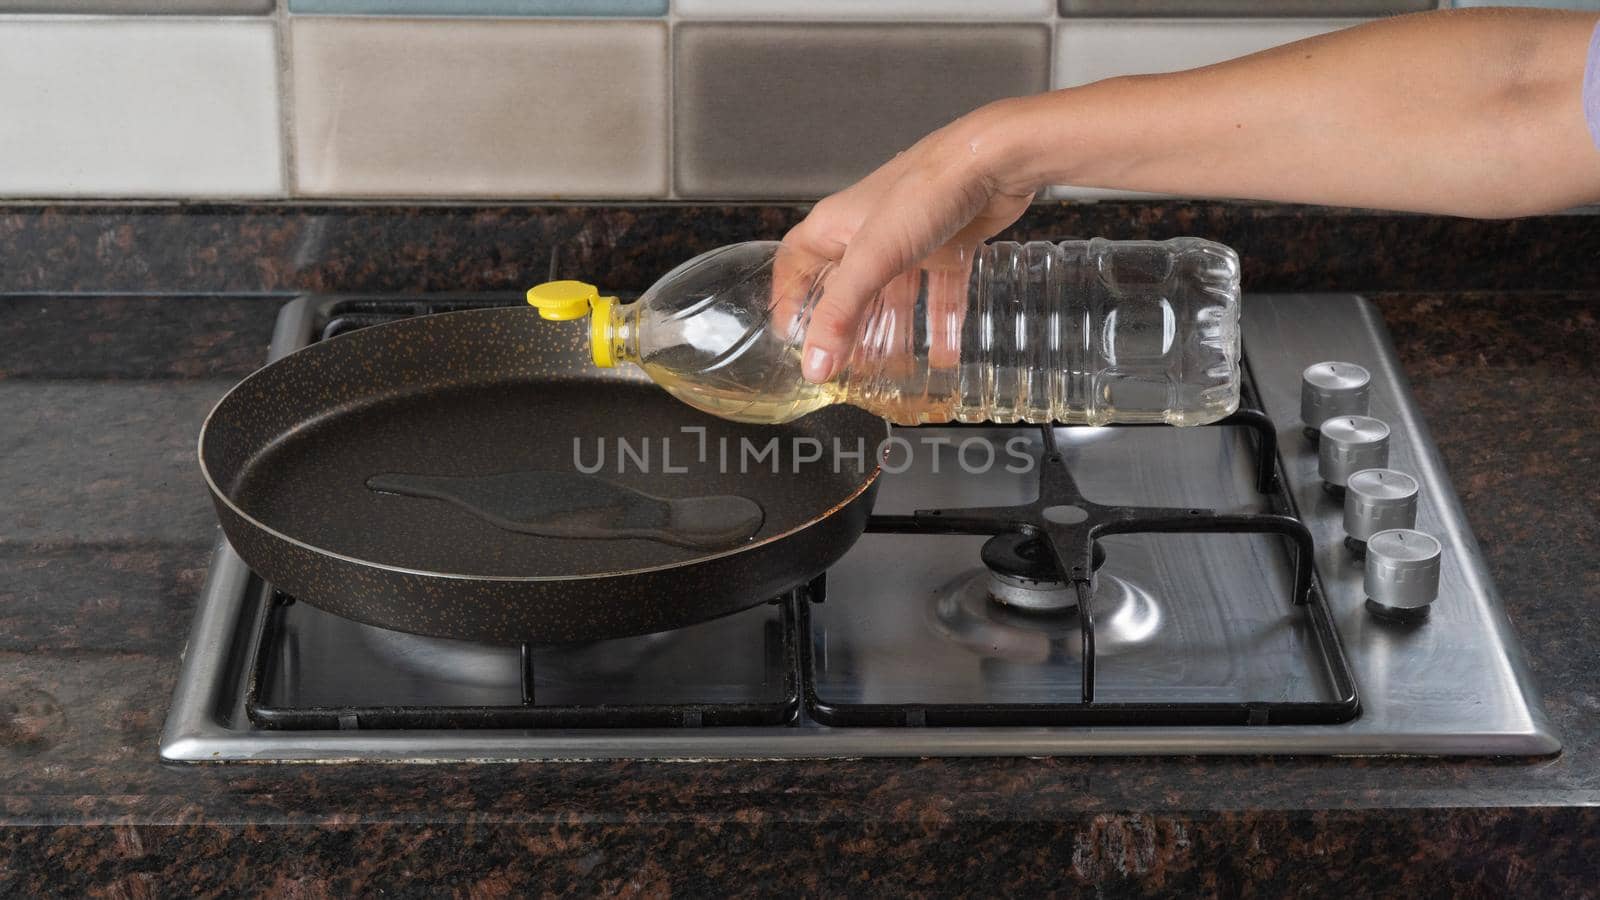 A woman's hand pours vegetable oil into a frying pan on the stove by voktybre